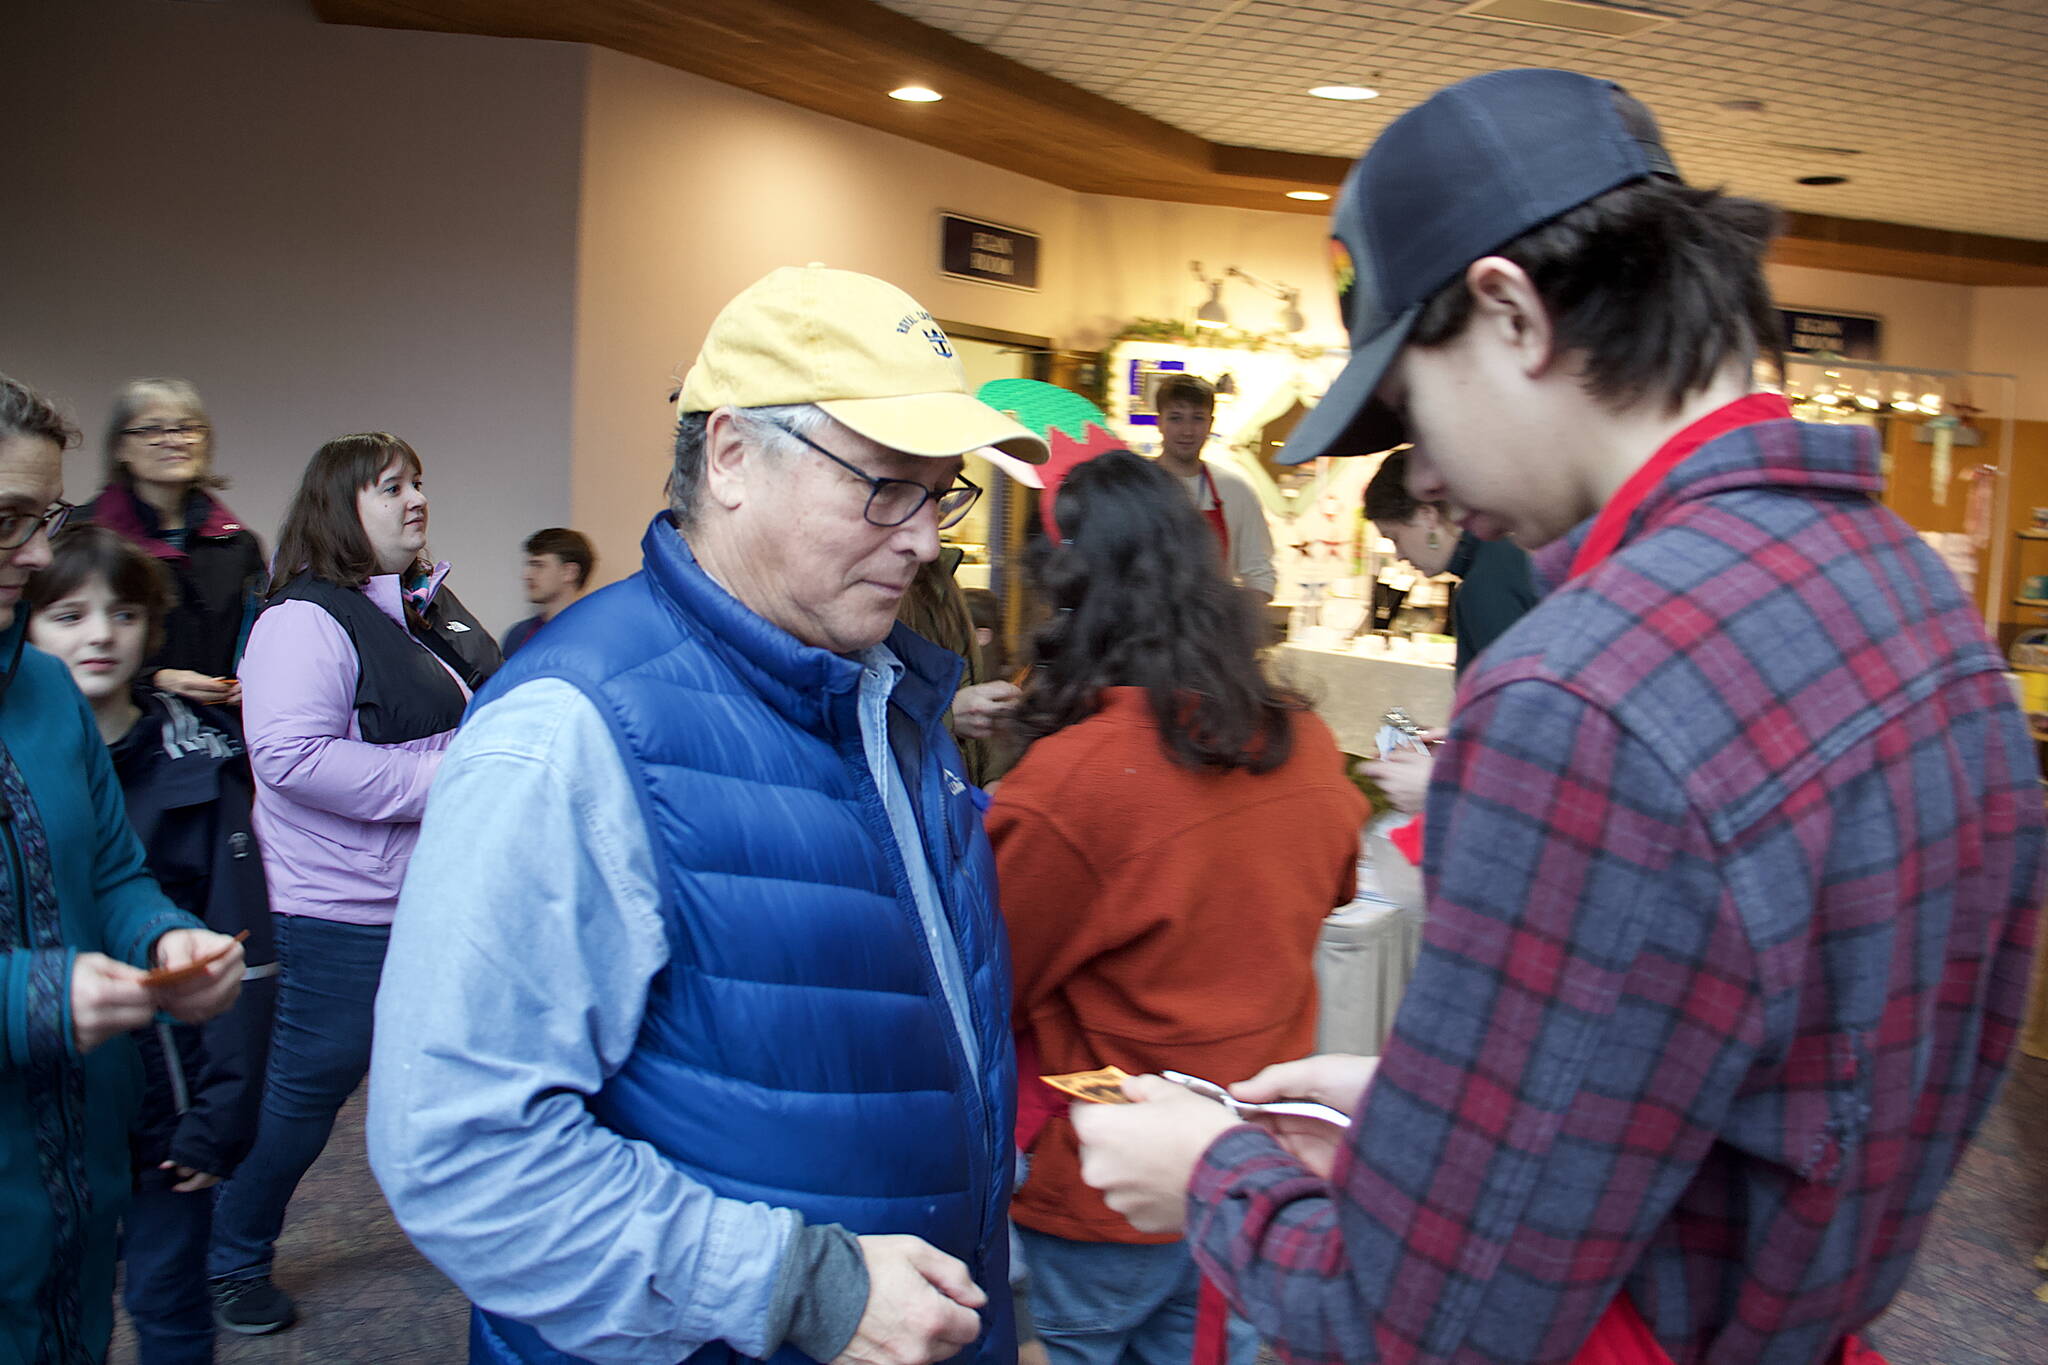 Larry Gamez (left) has his admission ticket to the Juneau Public Market punched on Friday. He was the second in line to enter the market at Centennial Hall, arriving an hour early. (Mark Sabbatini / Juneau Empire)